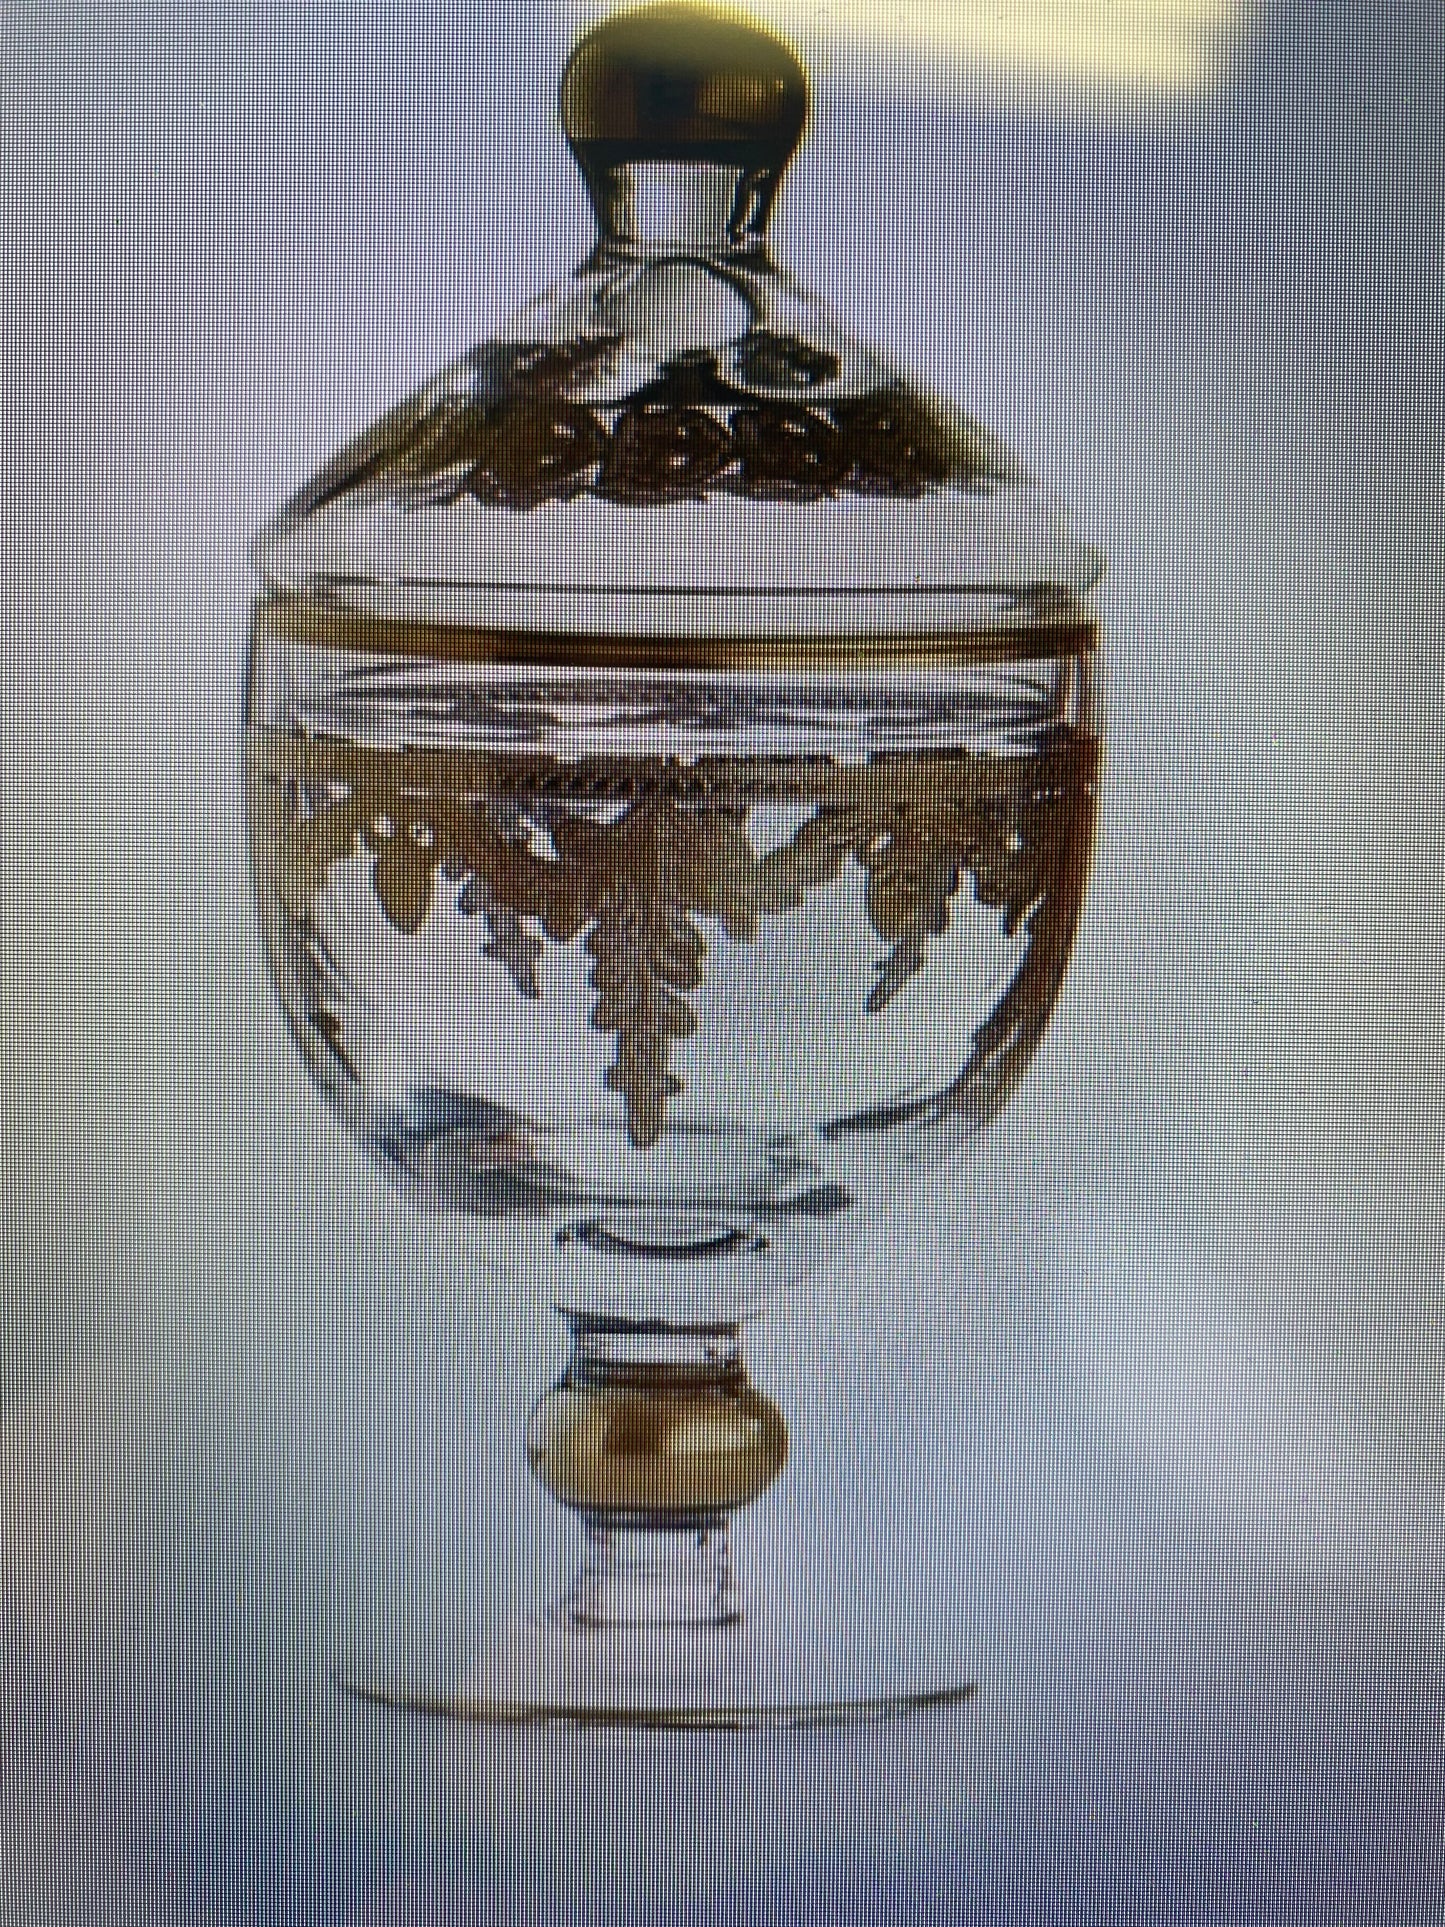 Baroque Gold Canister with Lid